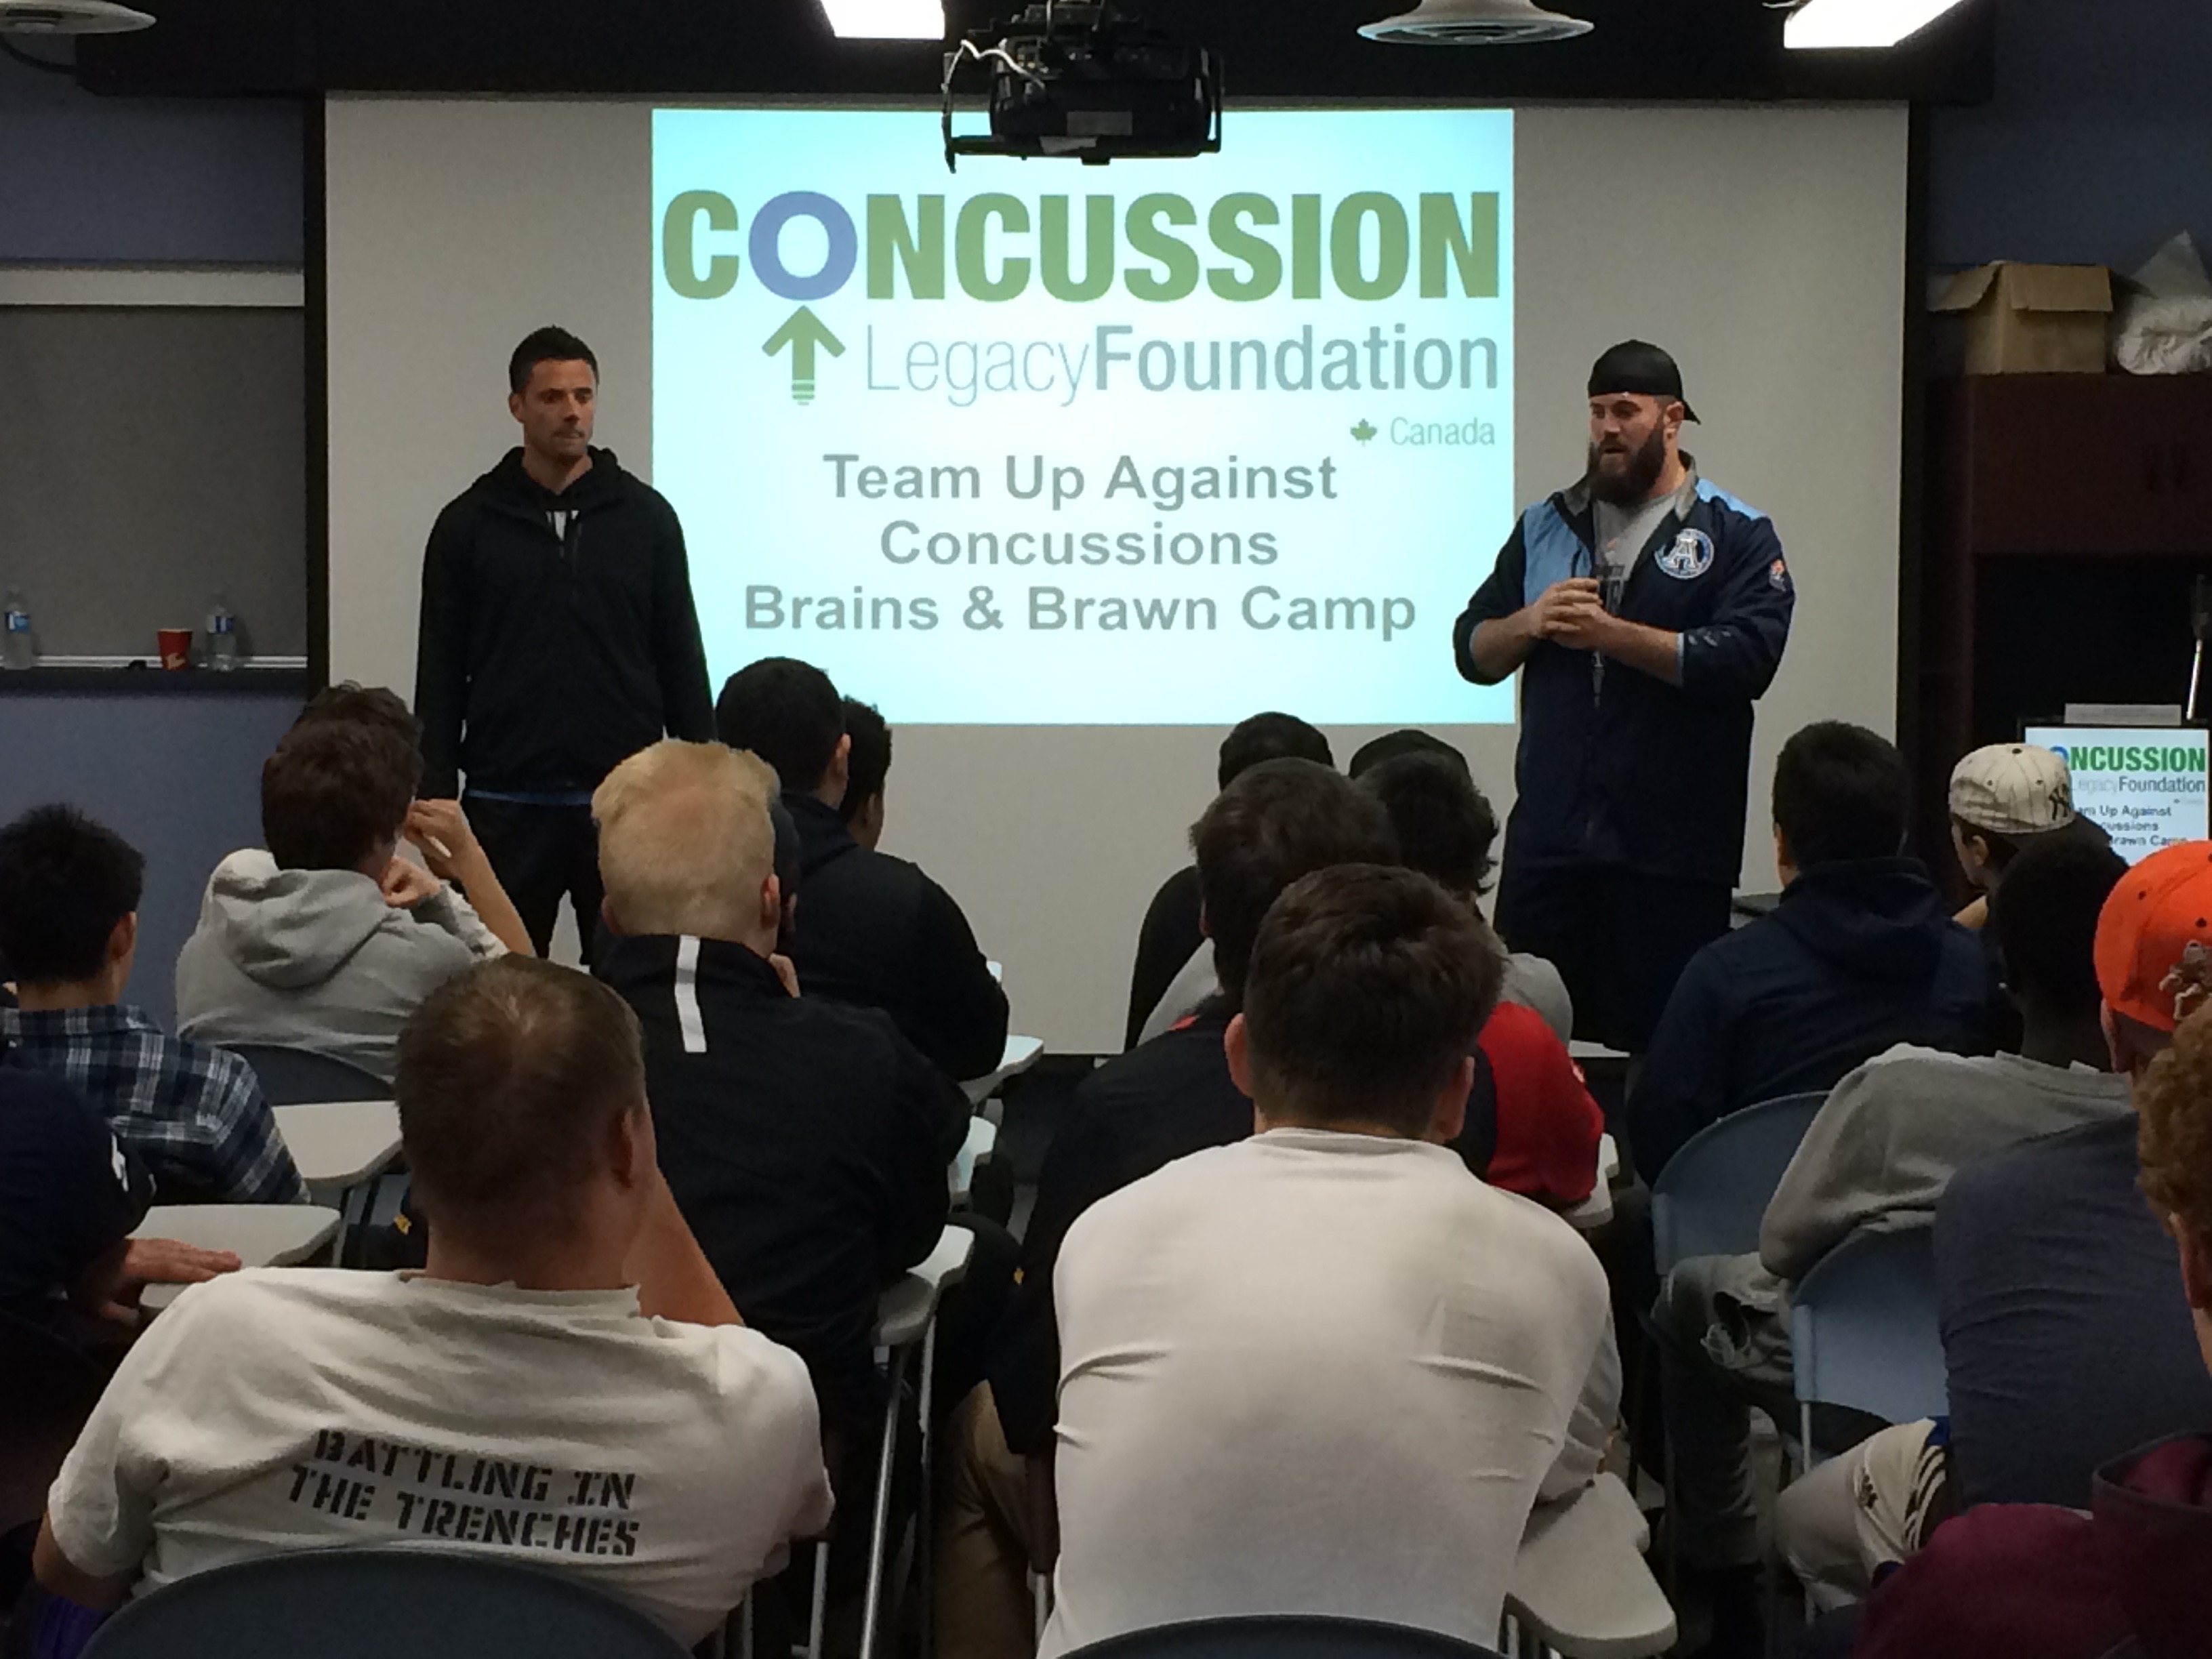 CLF Canada gives a Team Up Against Concussions presentation